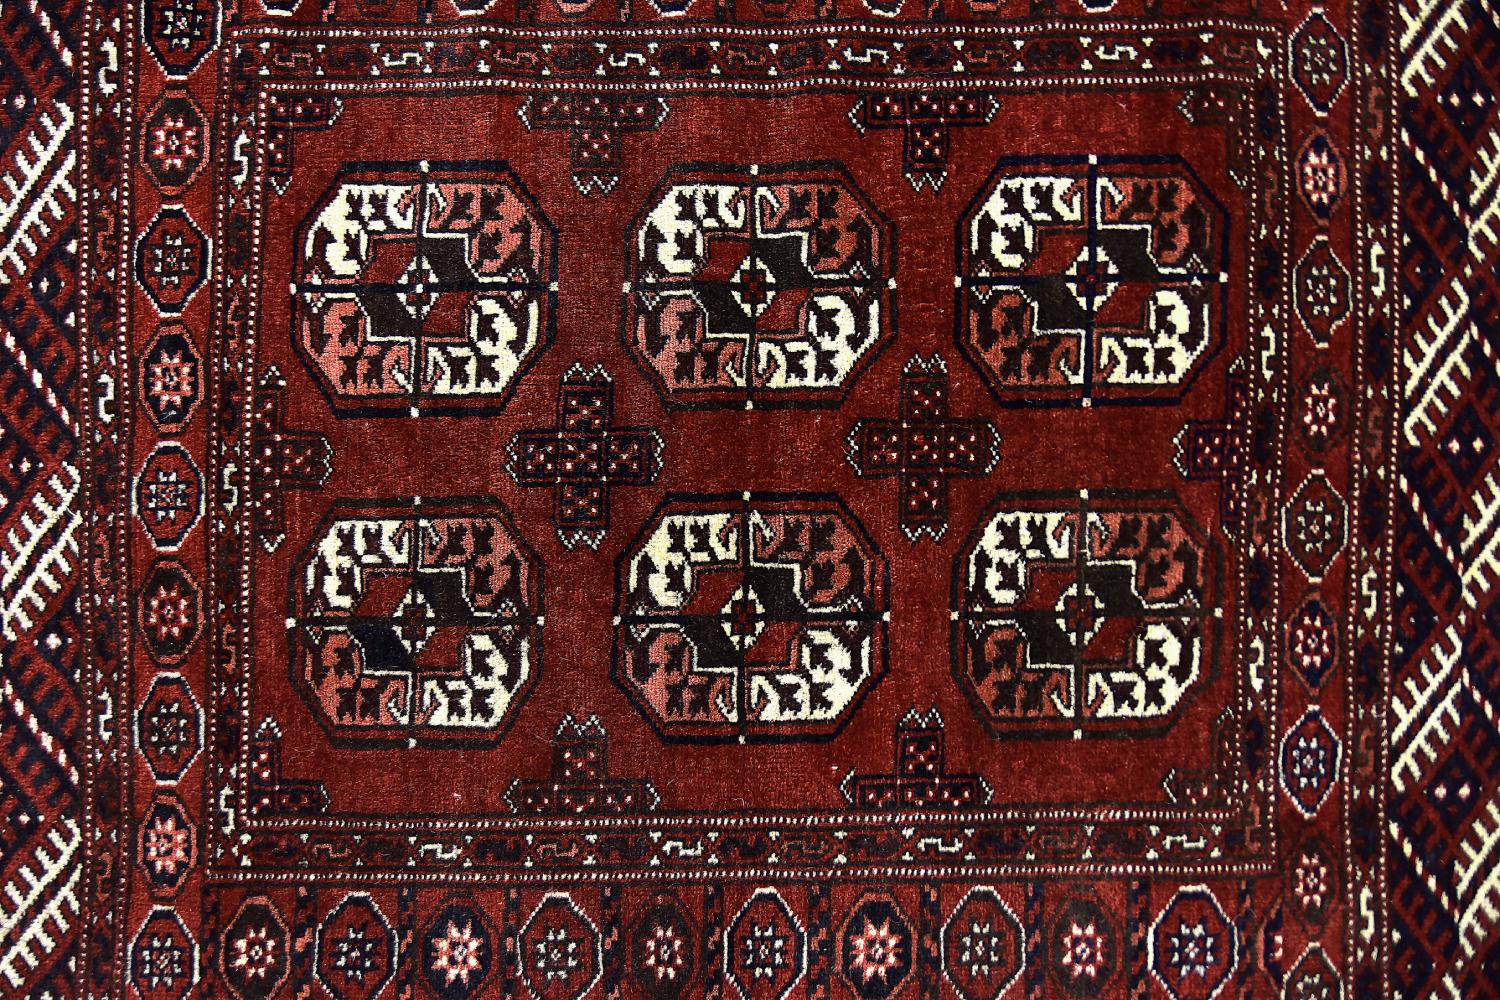 This oriental rug was made in Afghanistan during the 1970s. These rugs are hand knotted by Turkmen people in central and northern Afghanistan. Natural dyes, usually vegetable plant dyes, are used to obtain rich colors. The rugs are mostly medium